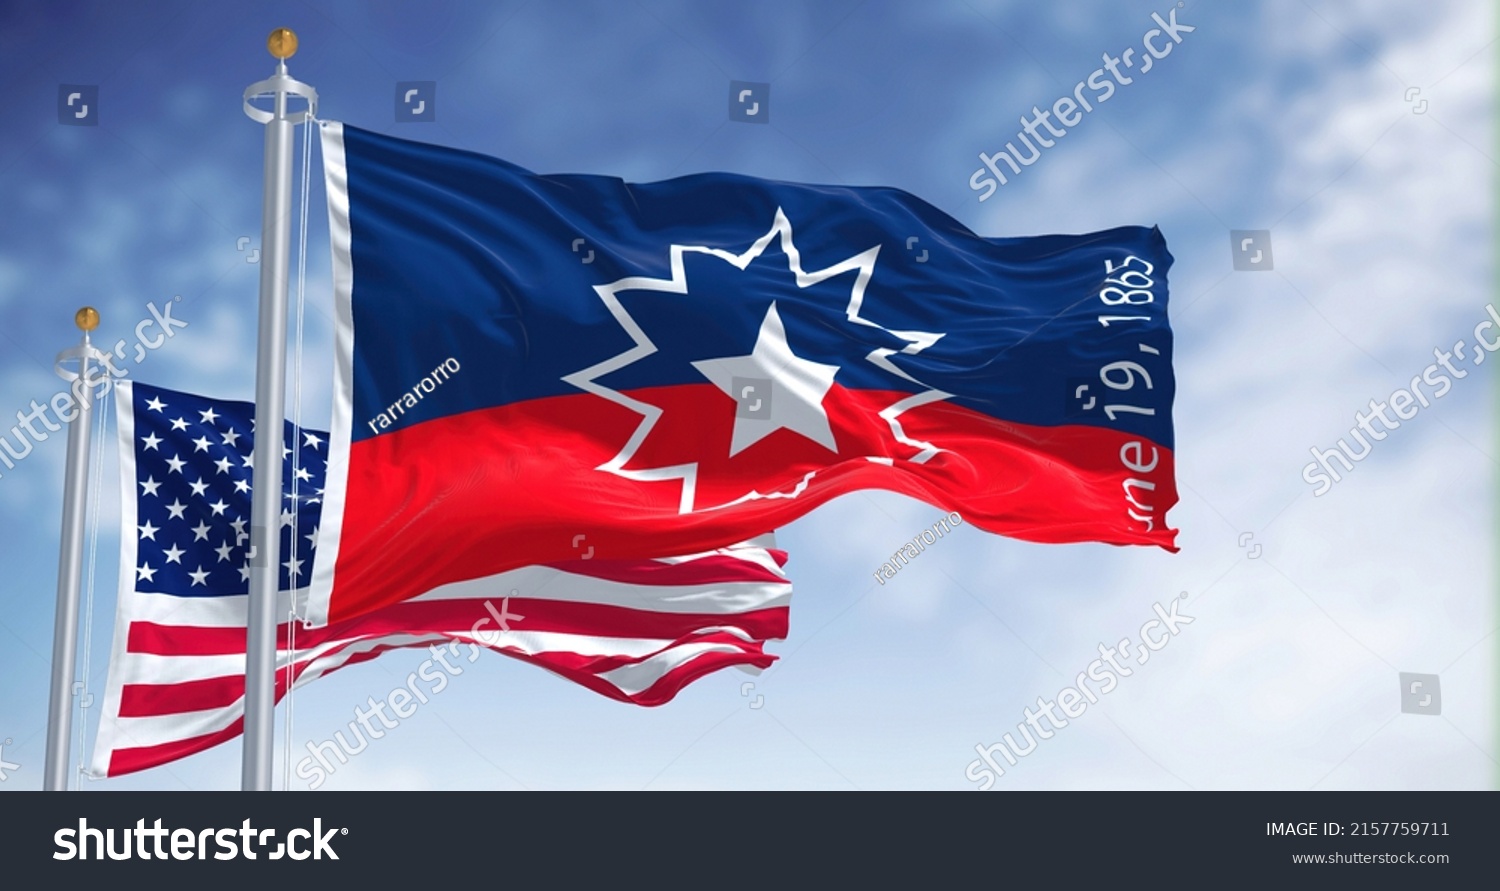 The Juneteenth flag waving in the wind with the american flag. Juneteenth is a federal holiday in the United States commemorating the emancipation of enslaved African-Americans #2157759711